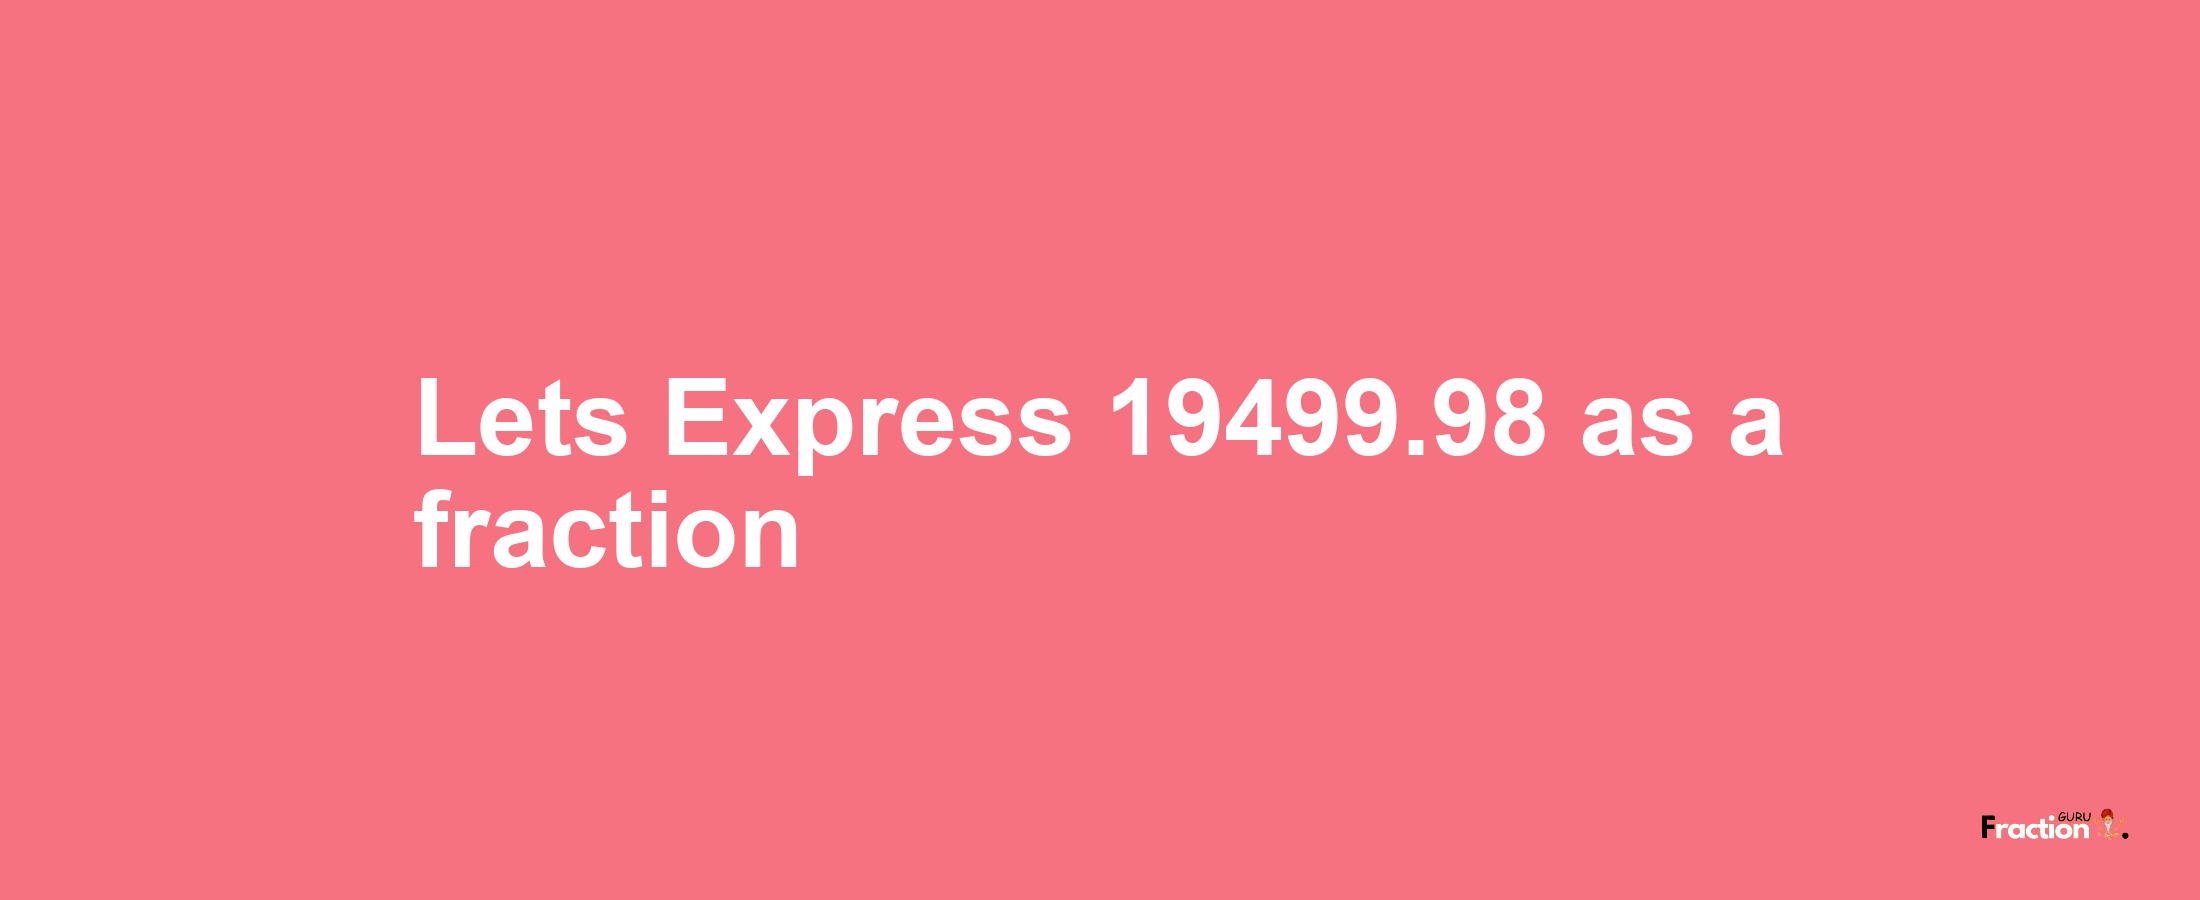 Lets Express 19499.98 as afraction